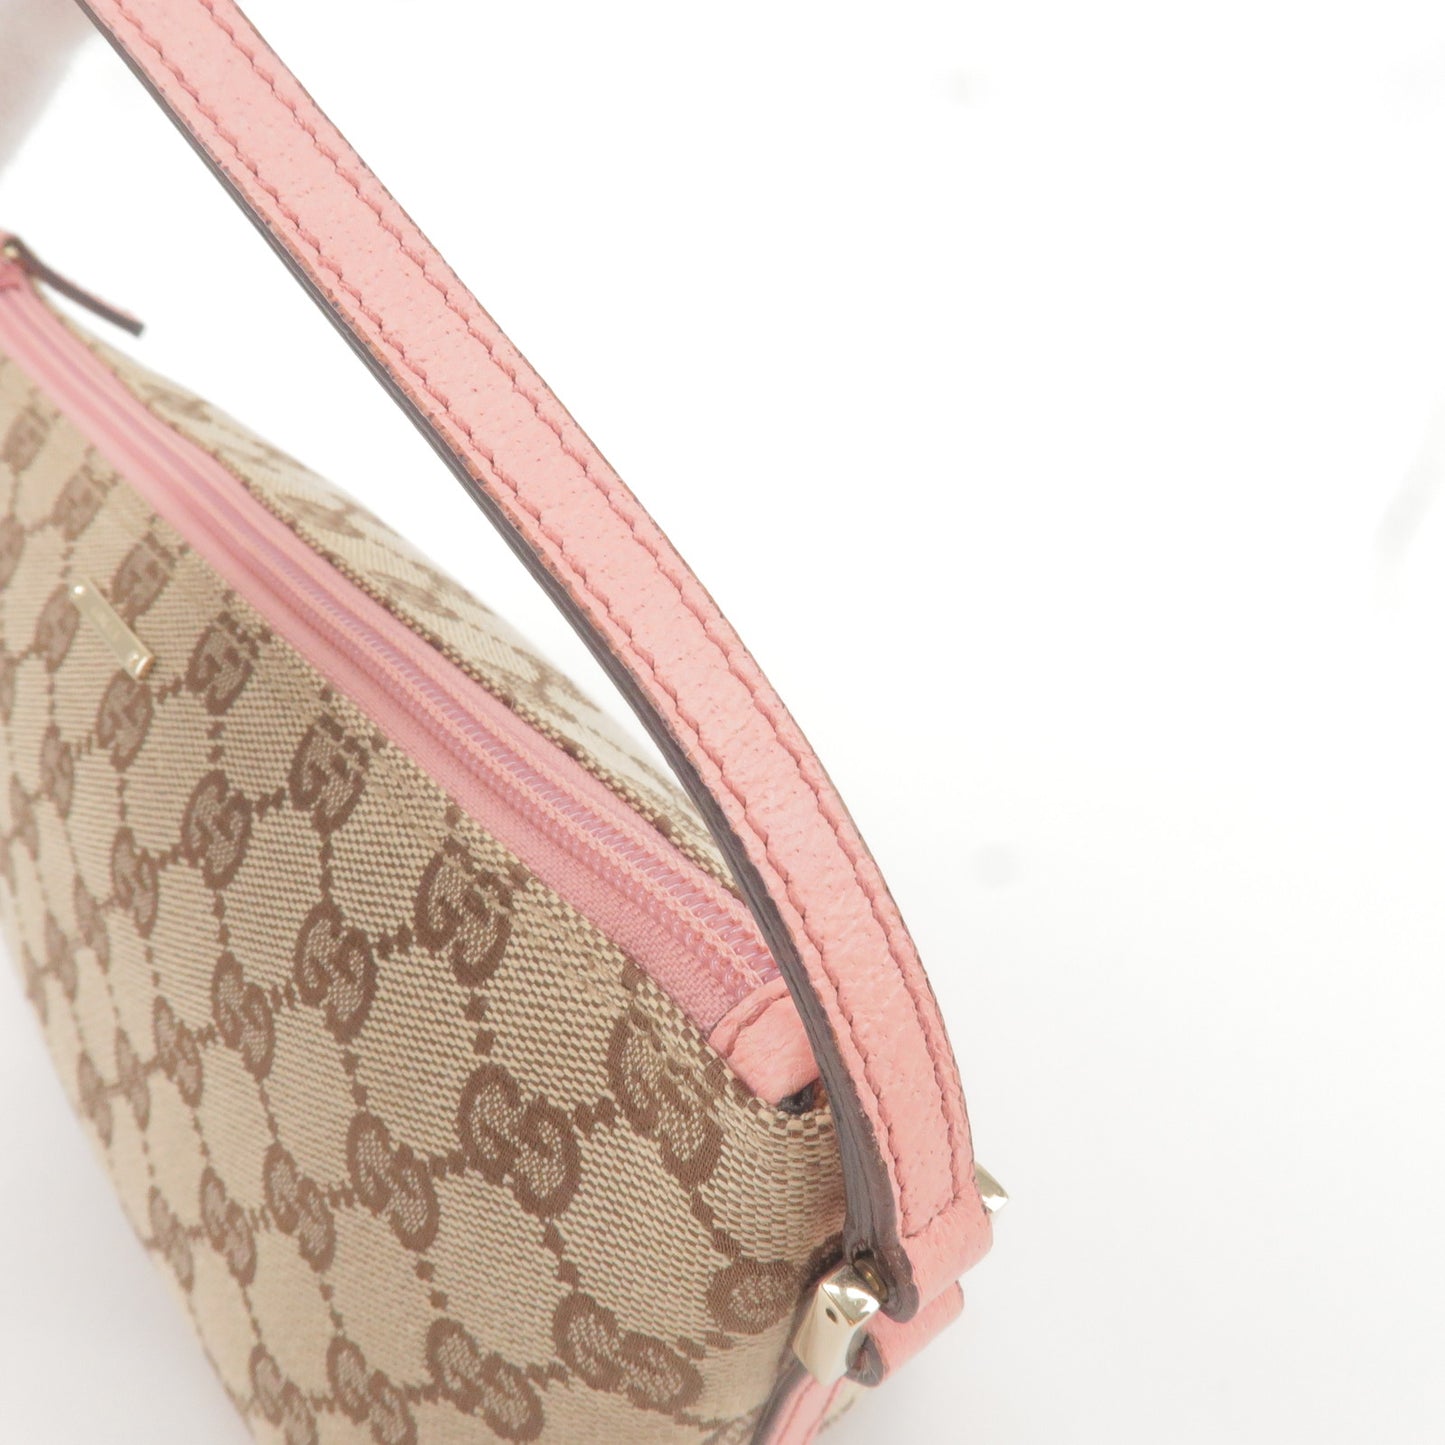 GUCCI GG Canvas Leather Boat Bag Hand Bag Beige Pink 07198